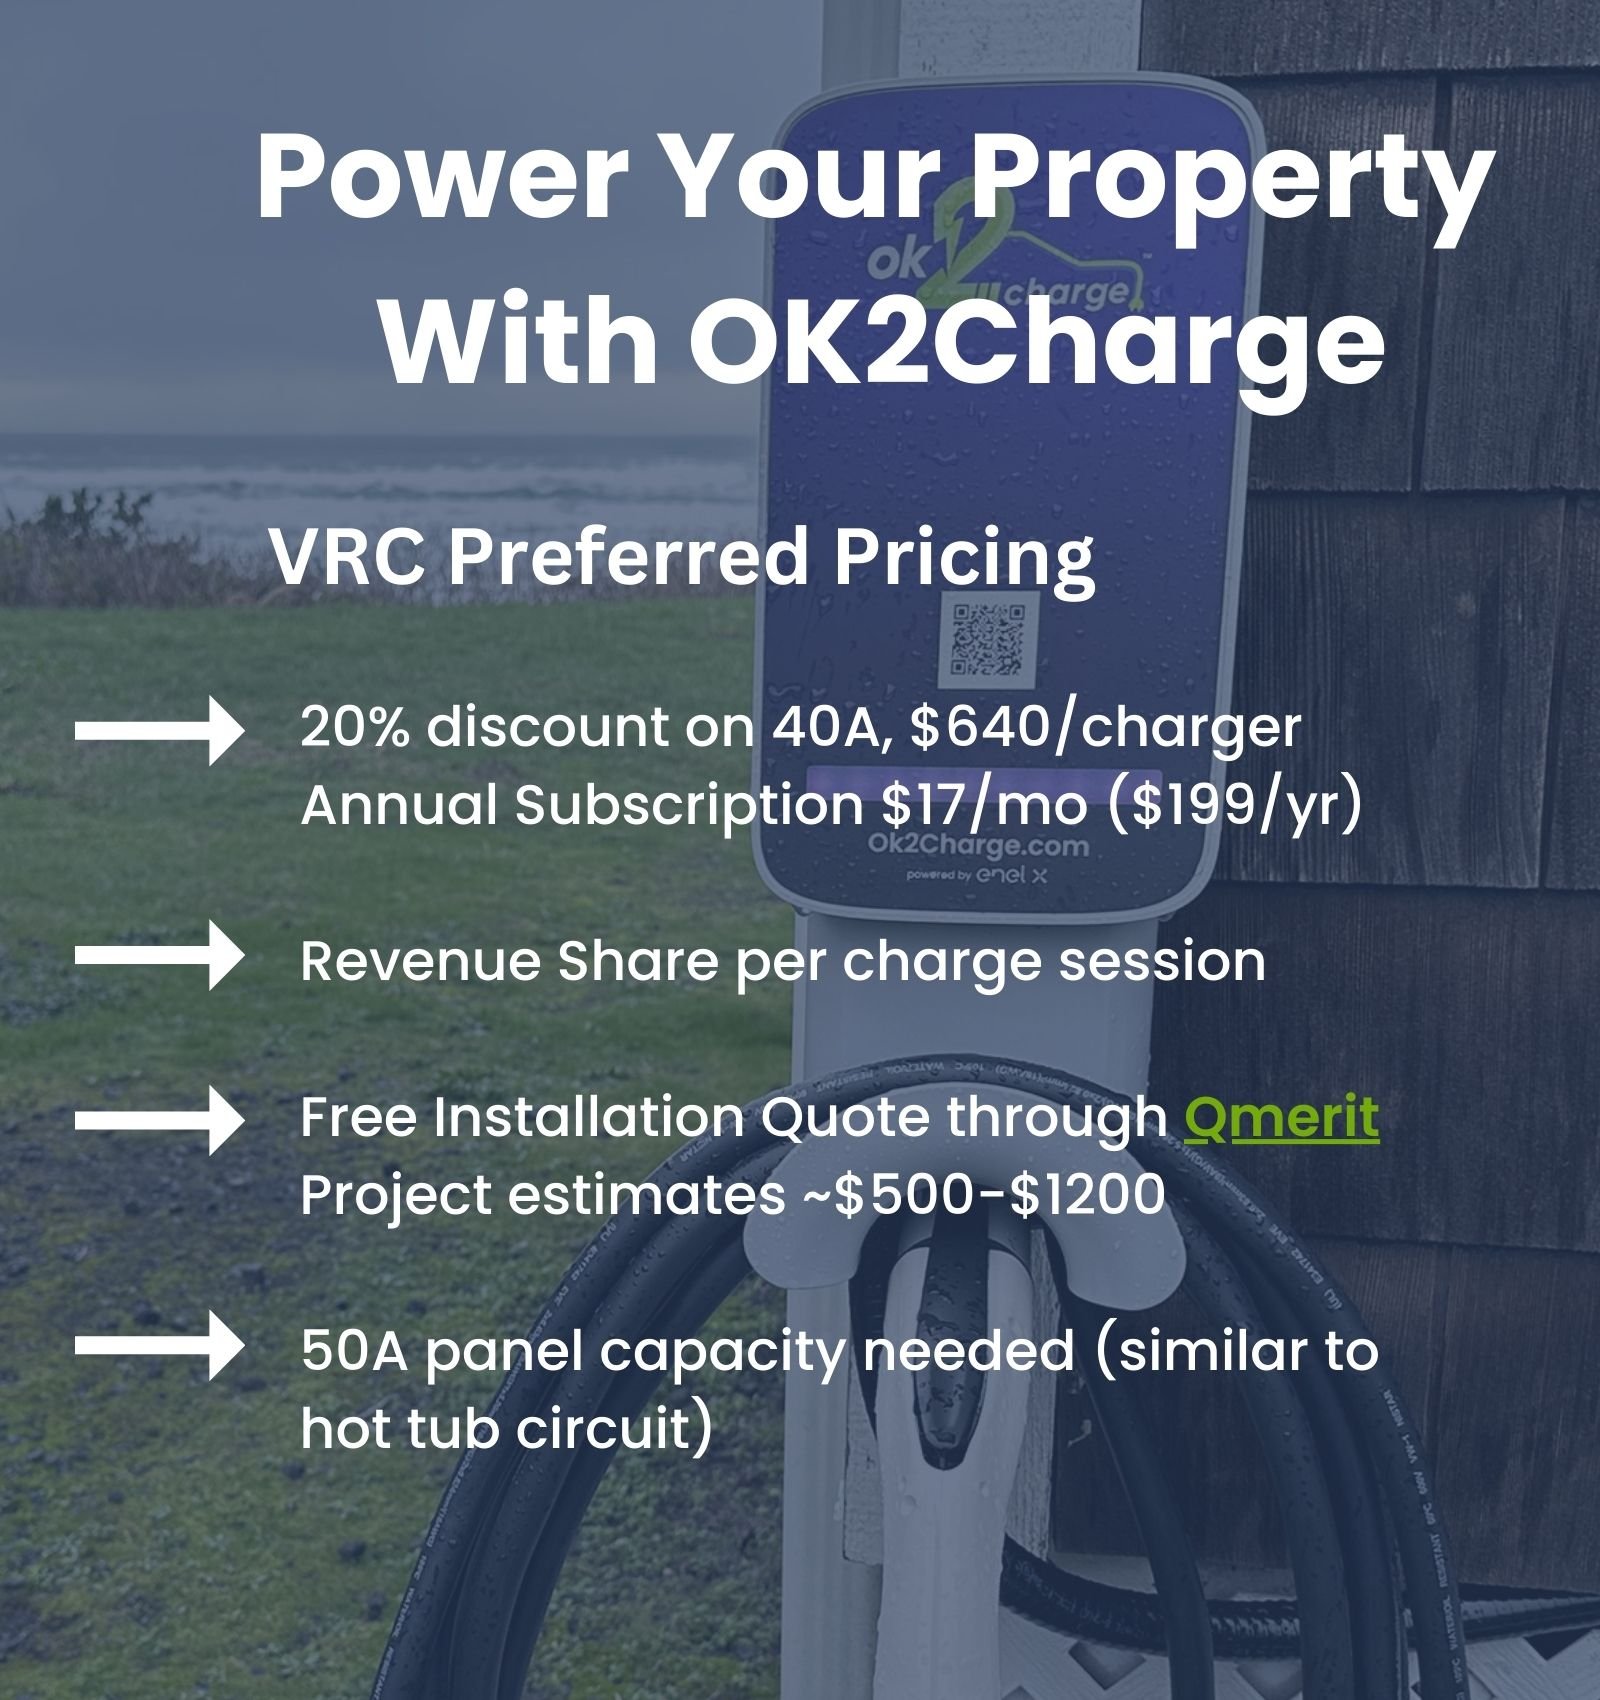 Power Your Property With OK2Charge - VRC (1)